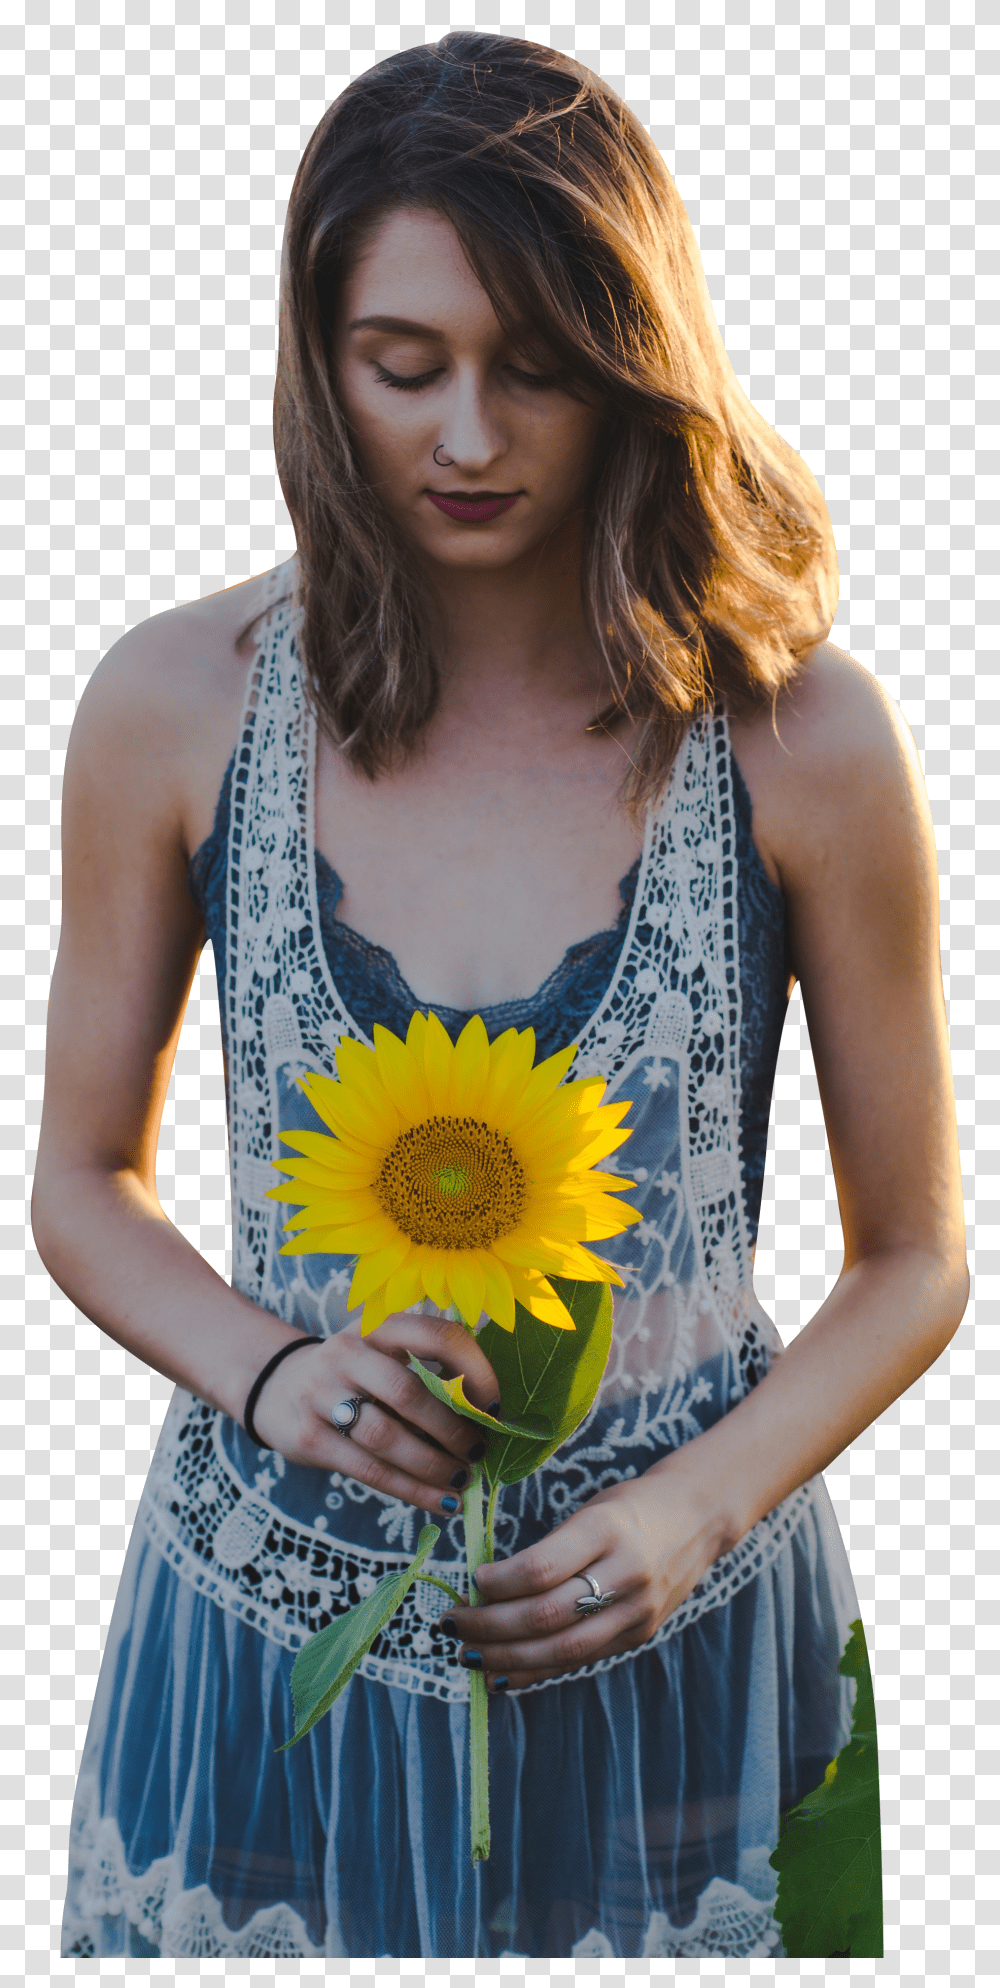 Woman Holding Sunflower Transparent Png